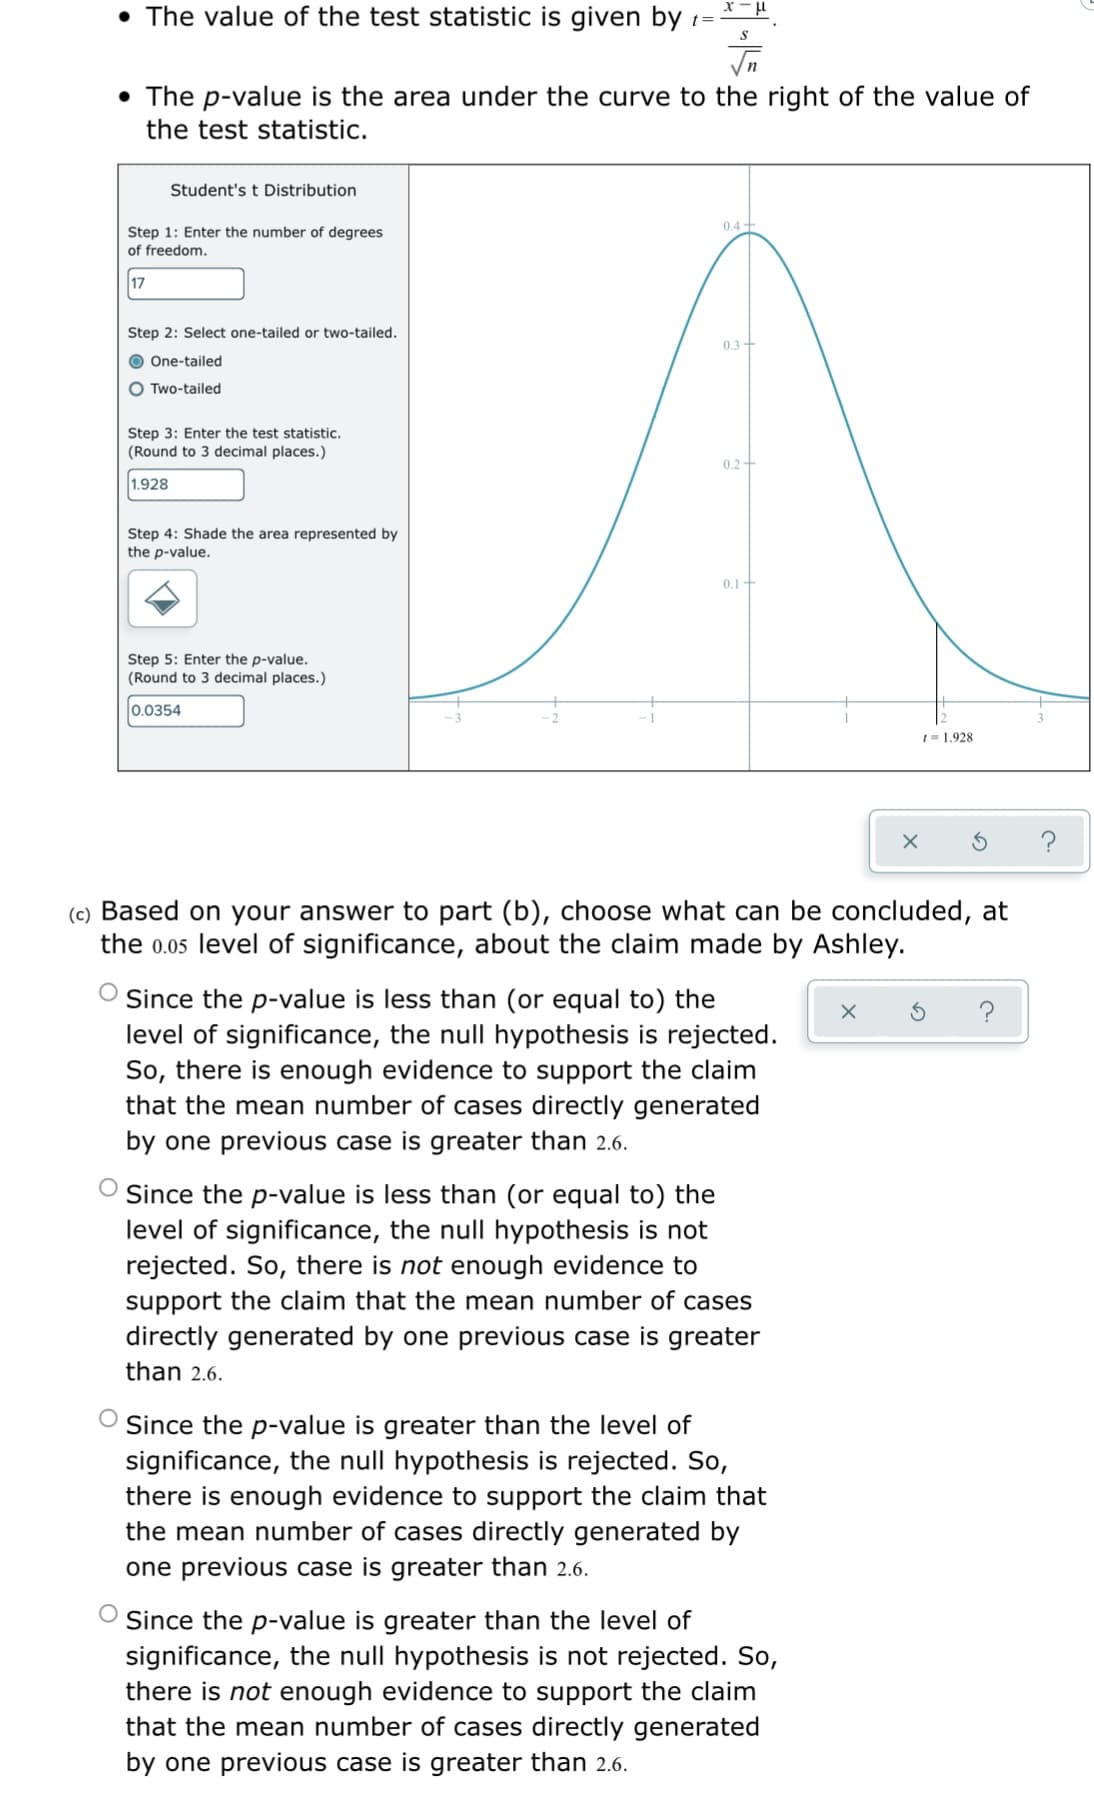 • The value of the test statistic is given by 1=
• The p-value is the area under the curve to the right of the value of
the test statistic.
Student's t Distribution
0,4 +
Step 1: Enter the number of degrees
of freedom.
17
Step 2: Select one-tailed or two-tailed.
0.3+
O One-tailed
O Two-tailed
Step 3: Enter the test statistic.
(Round to 3 decimal places.)
0.2+
1.928
Step 4: Shade the area represented by
the p-value.
0.1+
Step 5: Enter the p-value.
(Round to 3 decimal places.)
0.0354
1= 1.928
(c) Based on your answer to part (b), choose what can be concluded, at
the 0.05 level of significance, about the claim made by Ashley.
Since the p-value is less than (or equal to) the
level of significance, the null hypothesis is rejected.
So, there is enough evidence to support the claim
that the mean number of cases directly generated
?
by one previous case is greater than 2.6.
Since the p-value is less than (or equal to) the
level of significance, the null hypothesis is not
rejected. So, there is not enough evidence to
support the claim that the mean number of cases
directly generated by one previous case is greater
than 2.6.
Since the p-value is greater than the level of
significance, the null hypothesis is rejected. So,
there is enough evidence to support the claim that
the mean number of cases directly generated by
one previous case is greater than 2.6.
O Since the p-value is greater than the level of
significance, the null hypothesis is not rejected. So,
there is not enough evidence to support the claim
that the mean number of cases directly generated
by one previous case is greater than 2.6.
